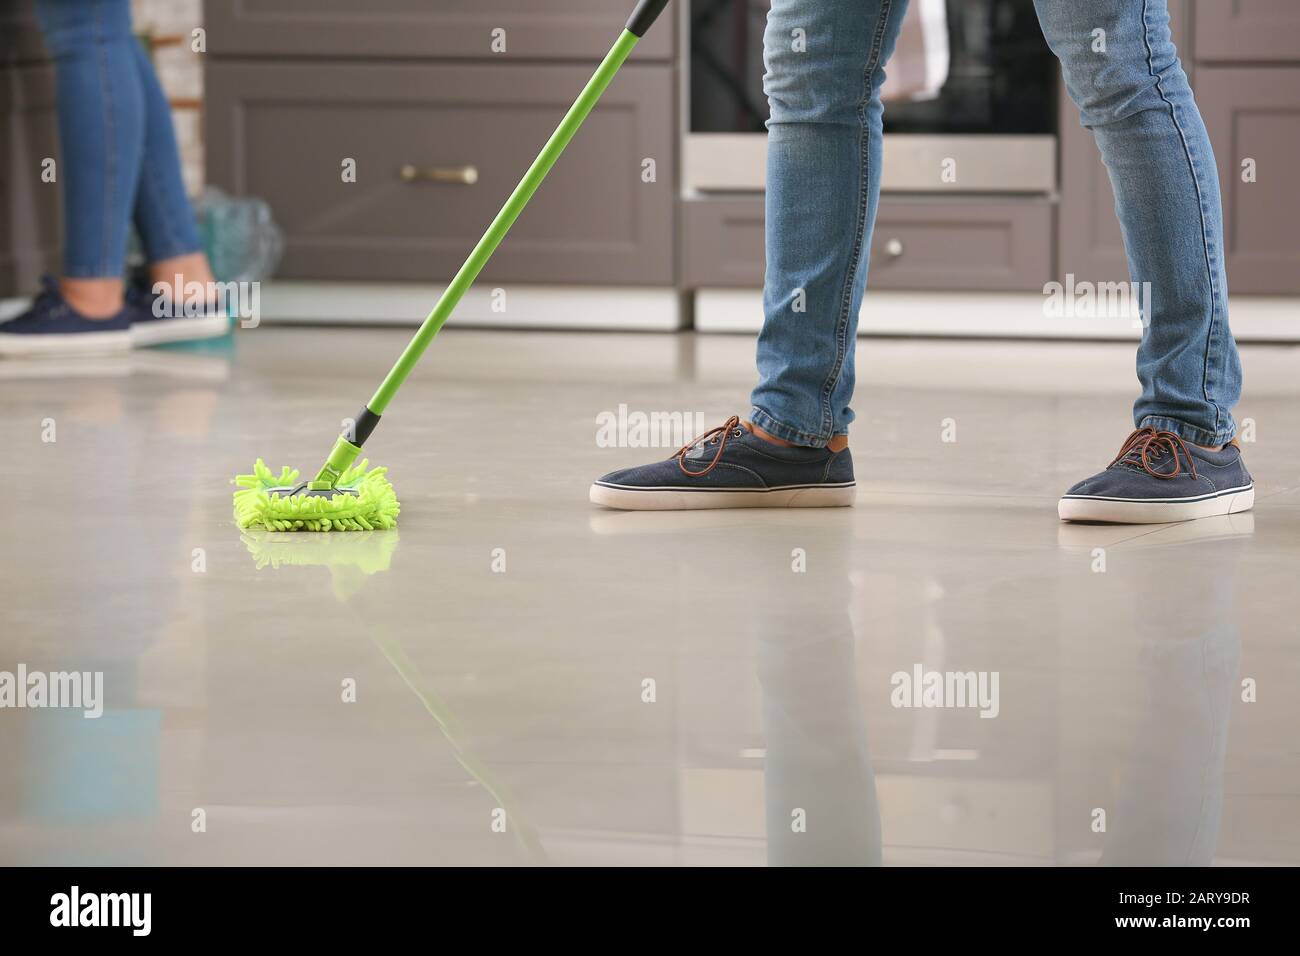 Male janitor mopping floor in kitchen Stock Photo